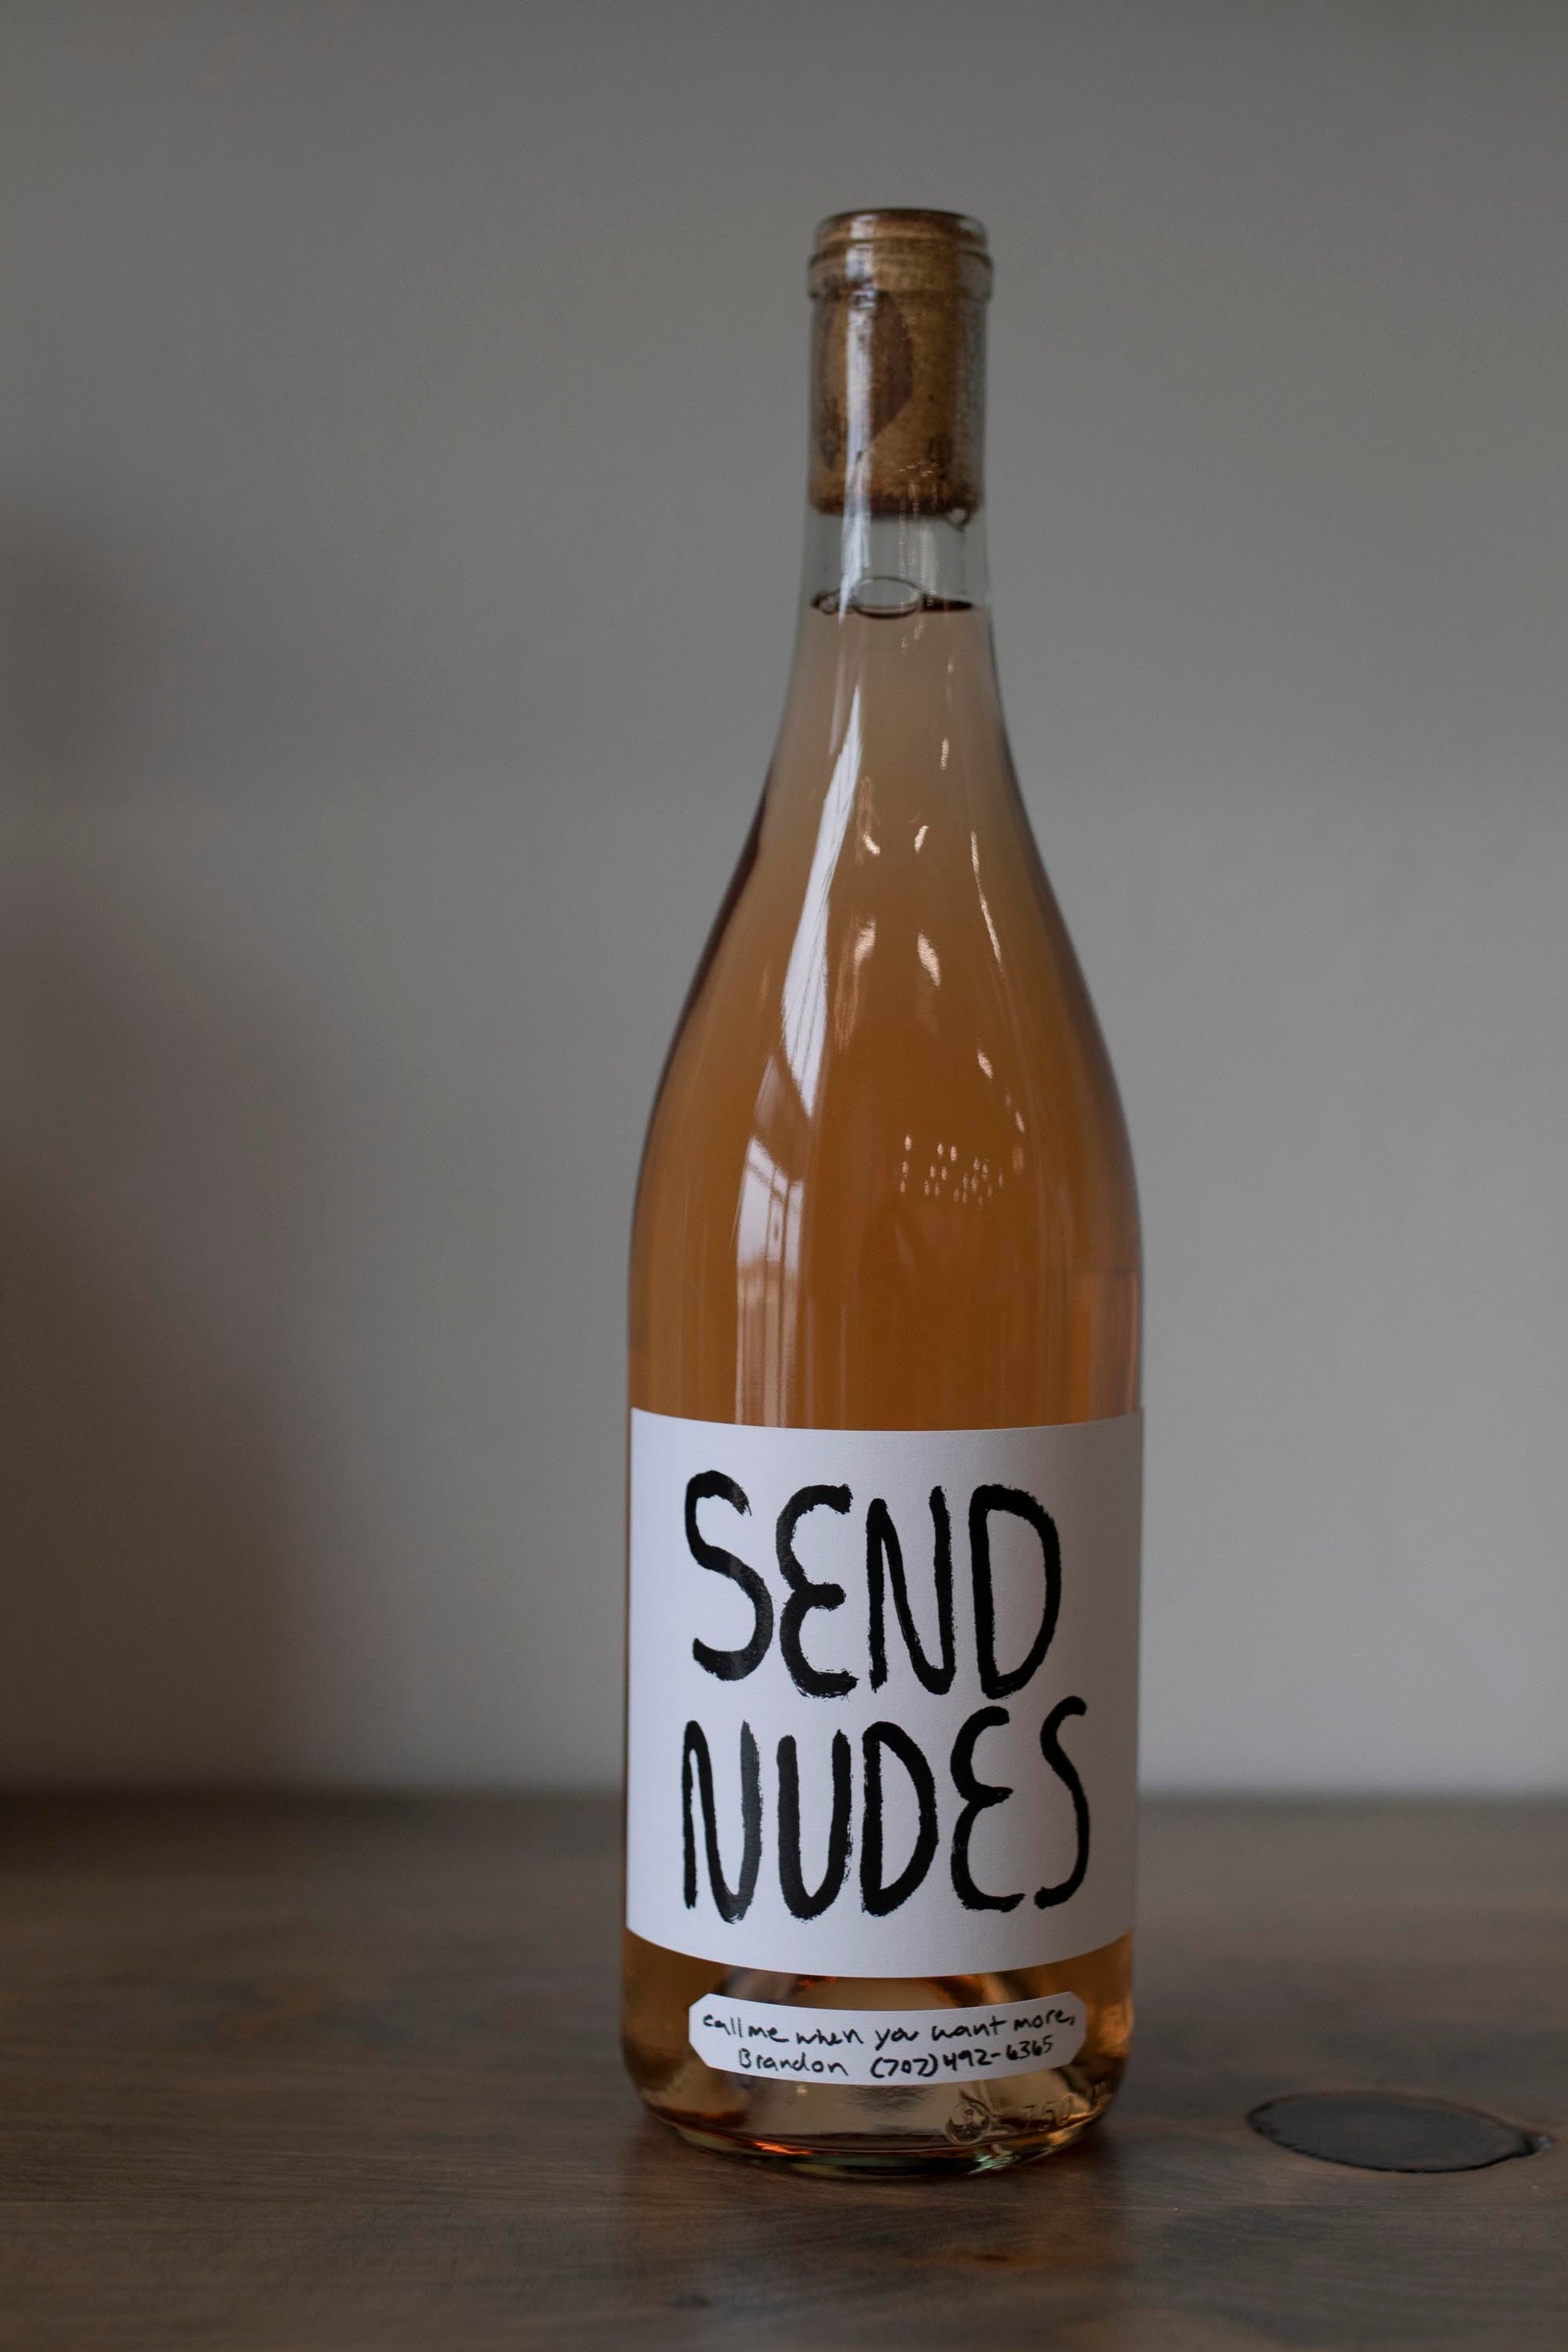 Bottle of Send Nudes Rose 2020 found at Vine & Board in 3809 NW 166th St Suite 1, Edmond, OK 73012